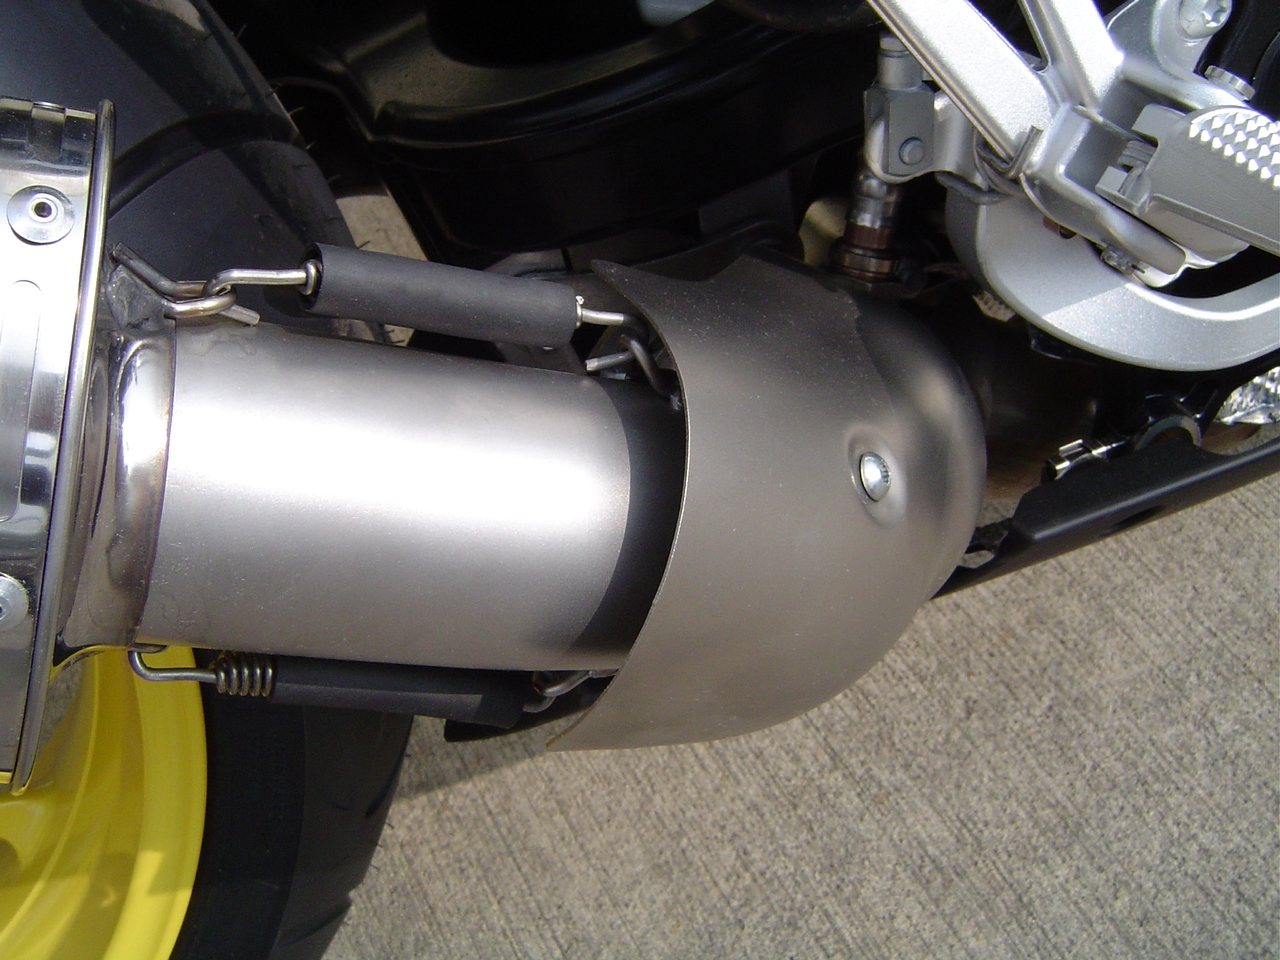 Exhaust system compatible with Bmw K 1200 Gt 2006-2008, Albus Ceramic, Homologated legal slip-on exhaust including removable db killer, link pipe and catalyst 